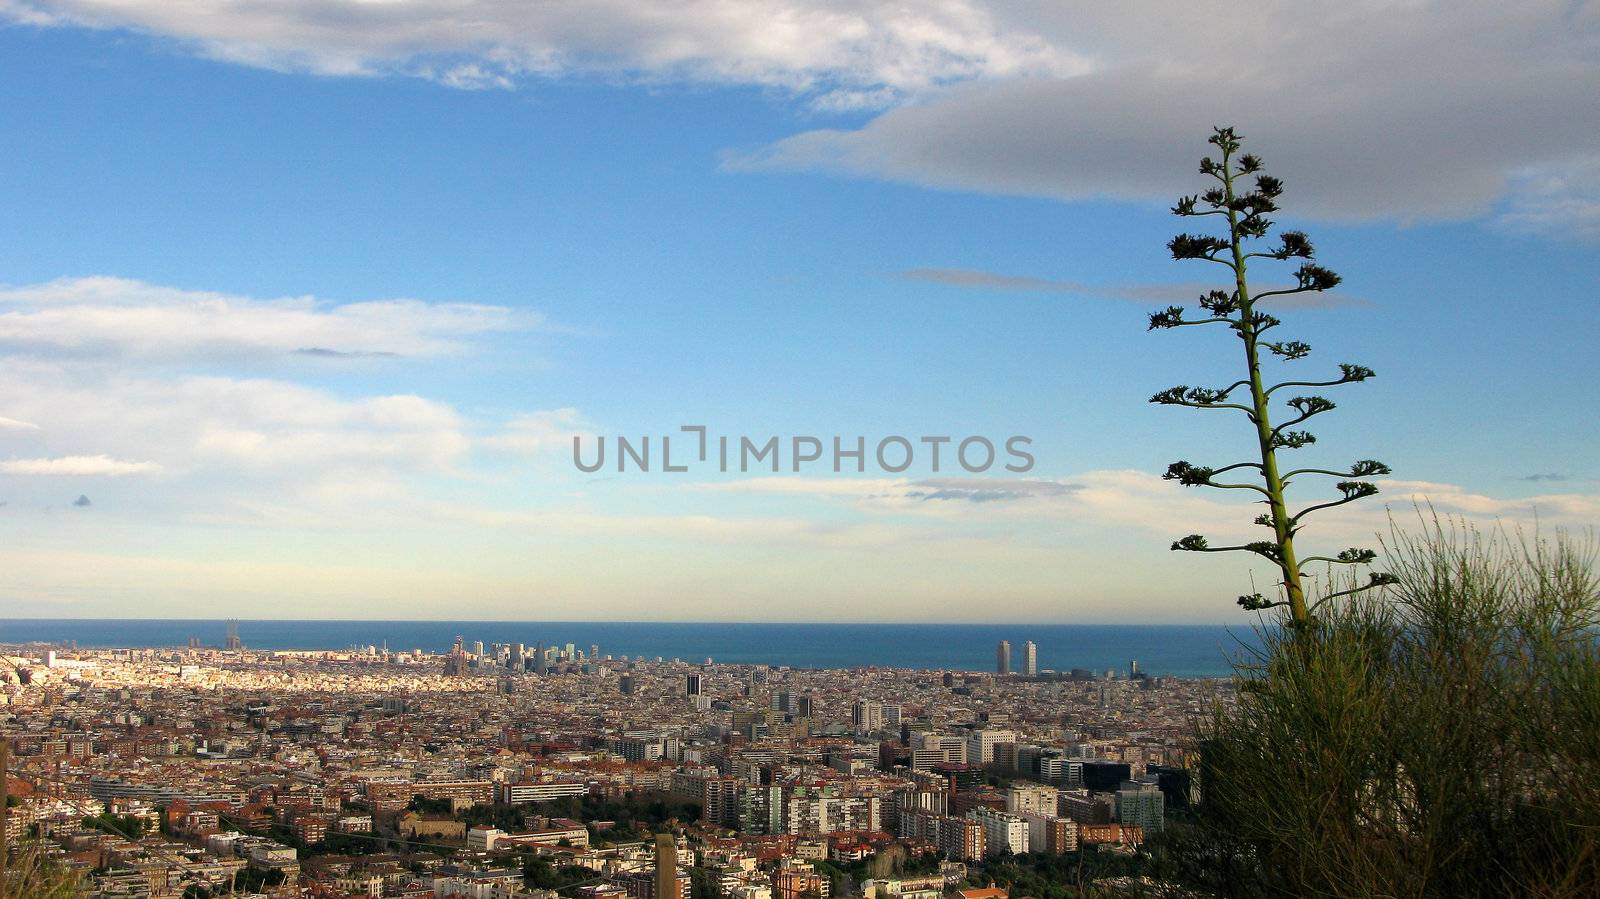 View on barcelona from the hill with sea in the background